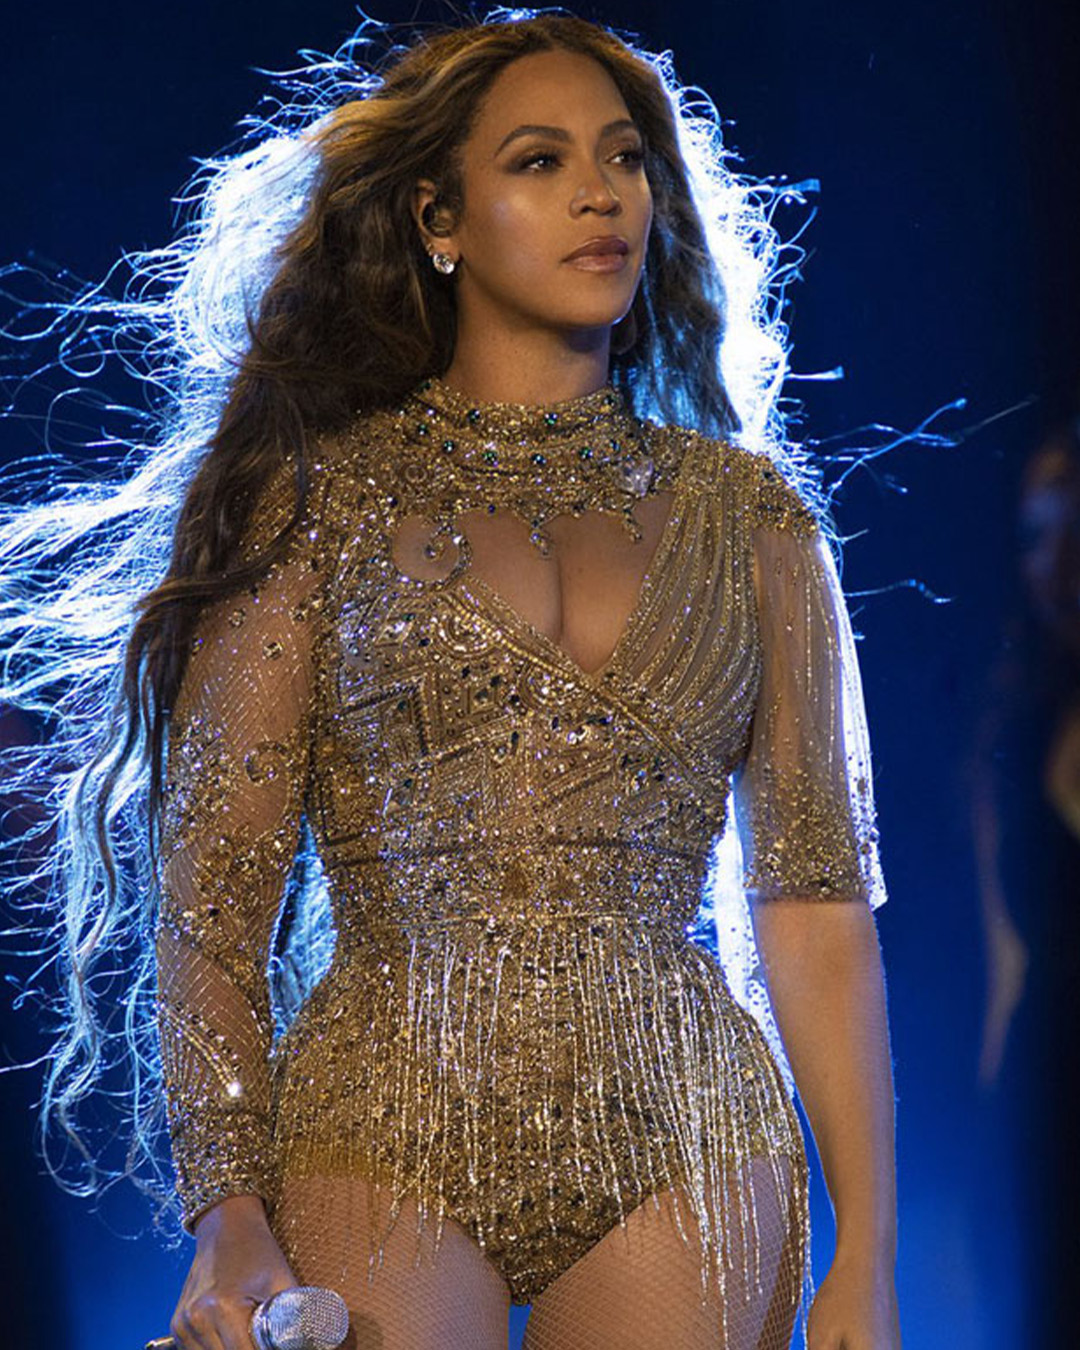 Beyoncé picked a jeweled, golden bodysuit for women